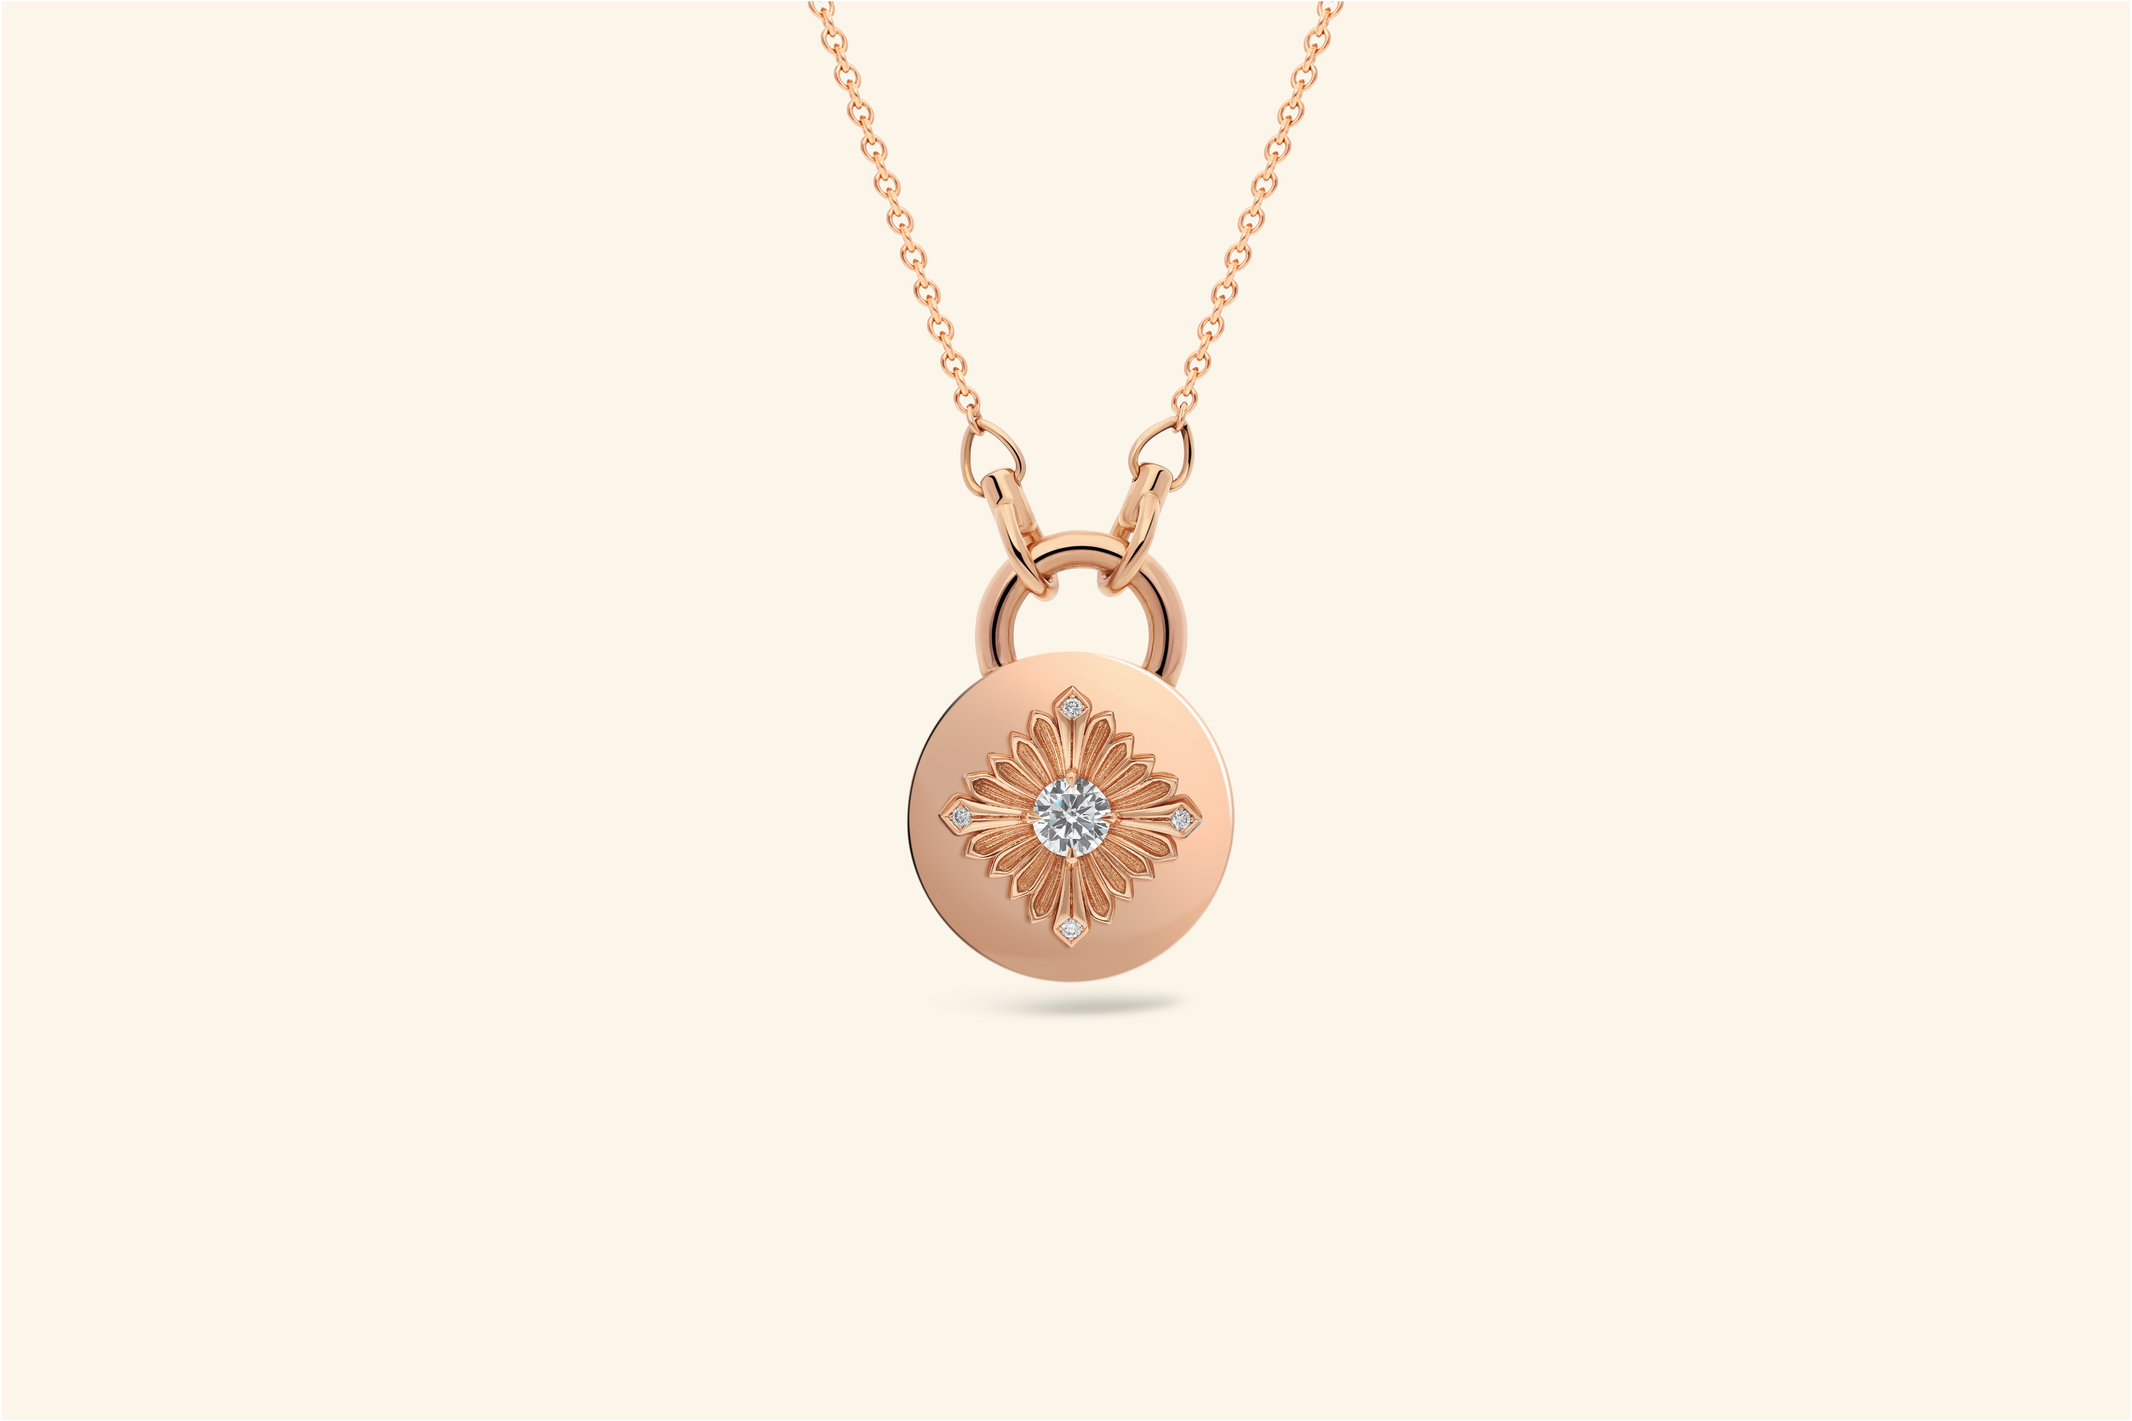 Tag necklace, rose gold, diamonds